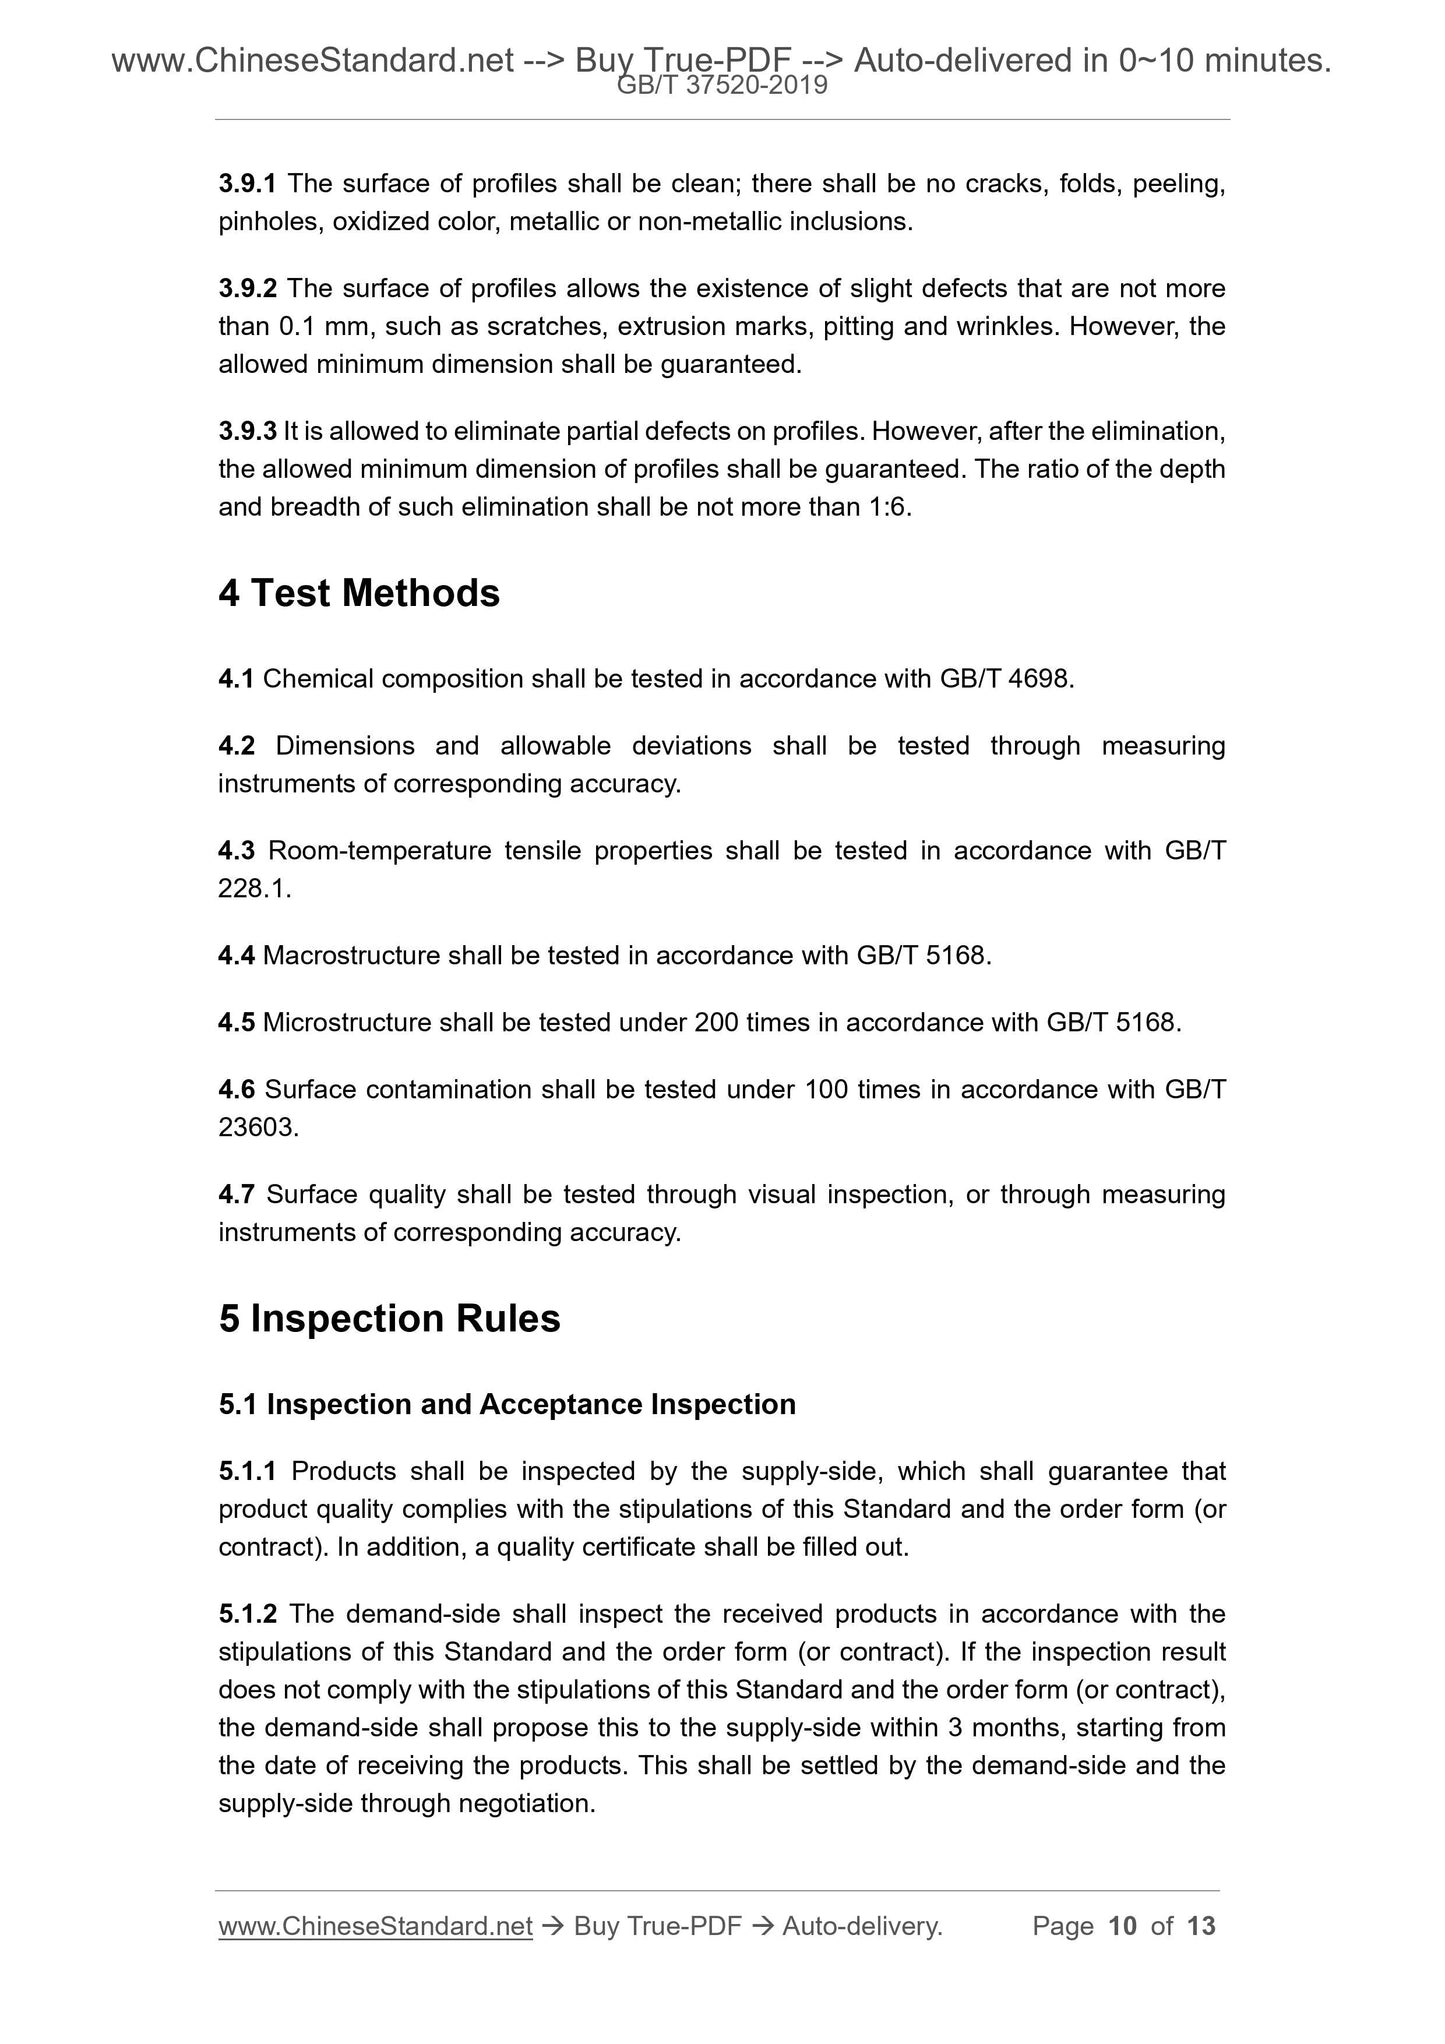 GB/T 37520-2019 Page 4